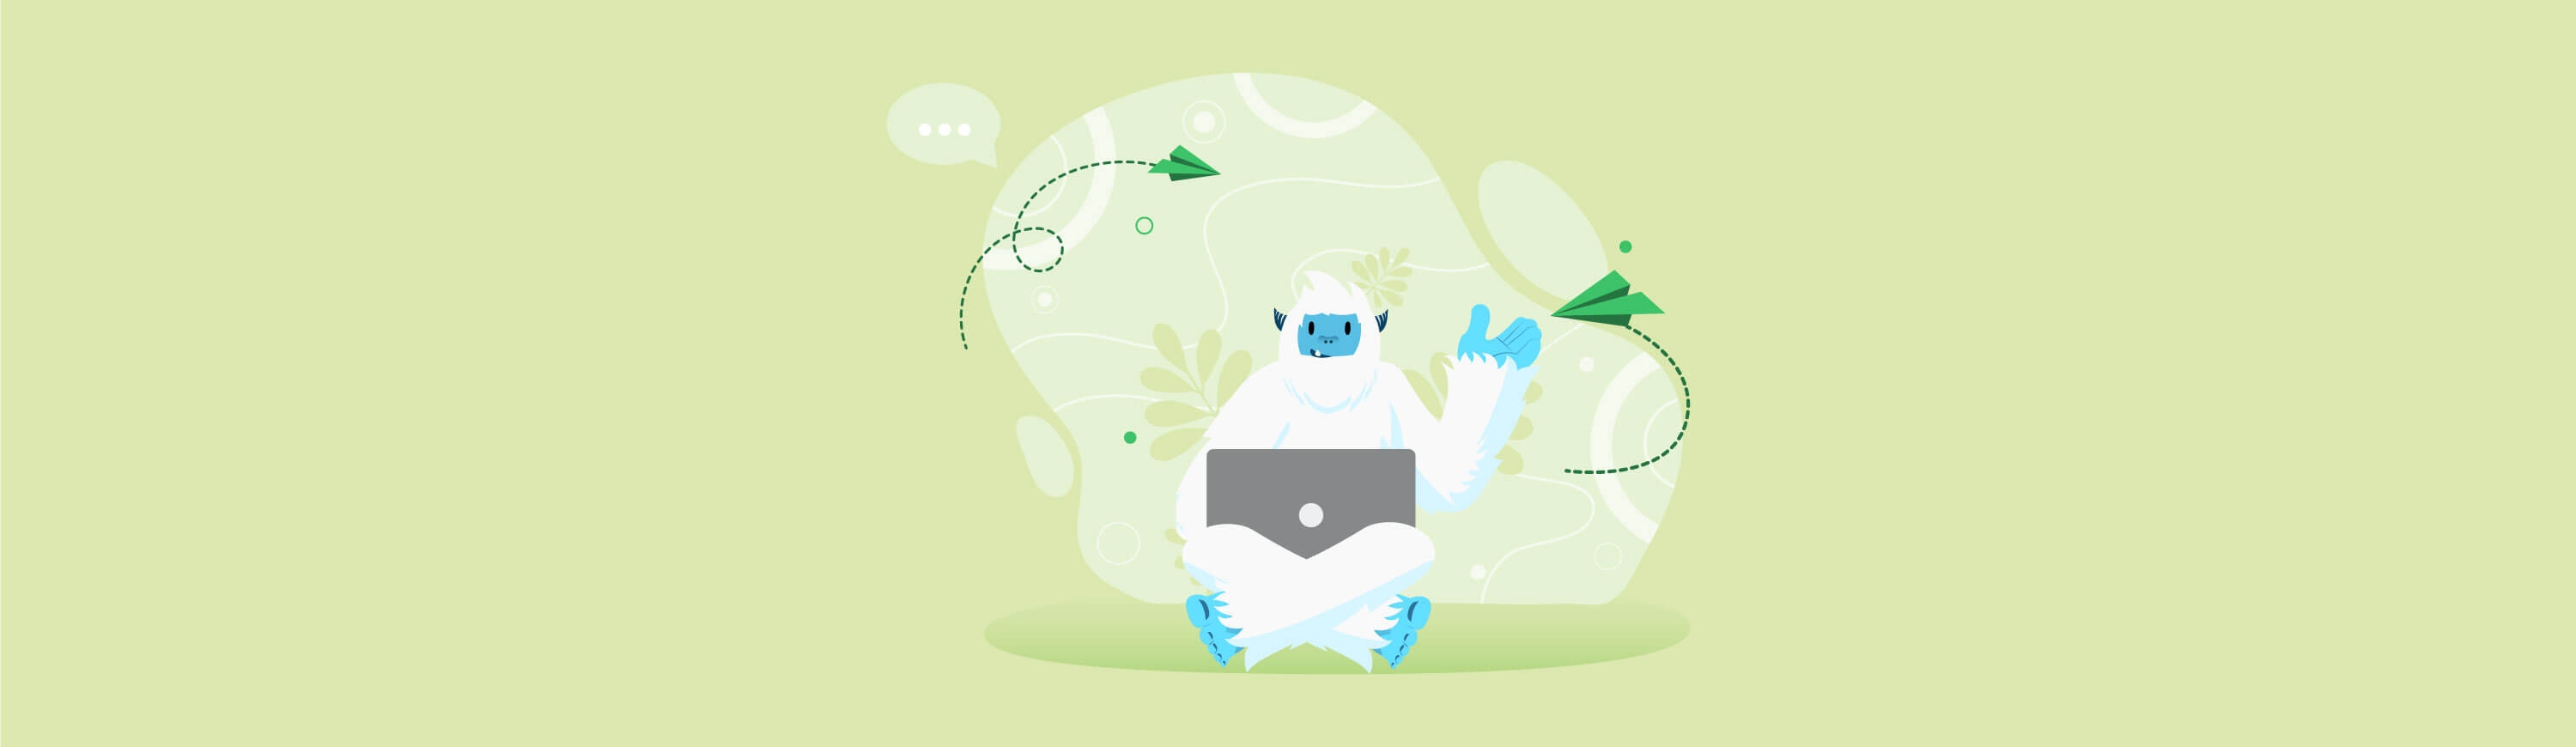 Illustration of Carl the yeti laying in a hammock on a laptop with a plant next to him.